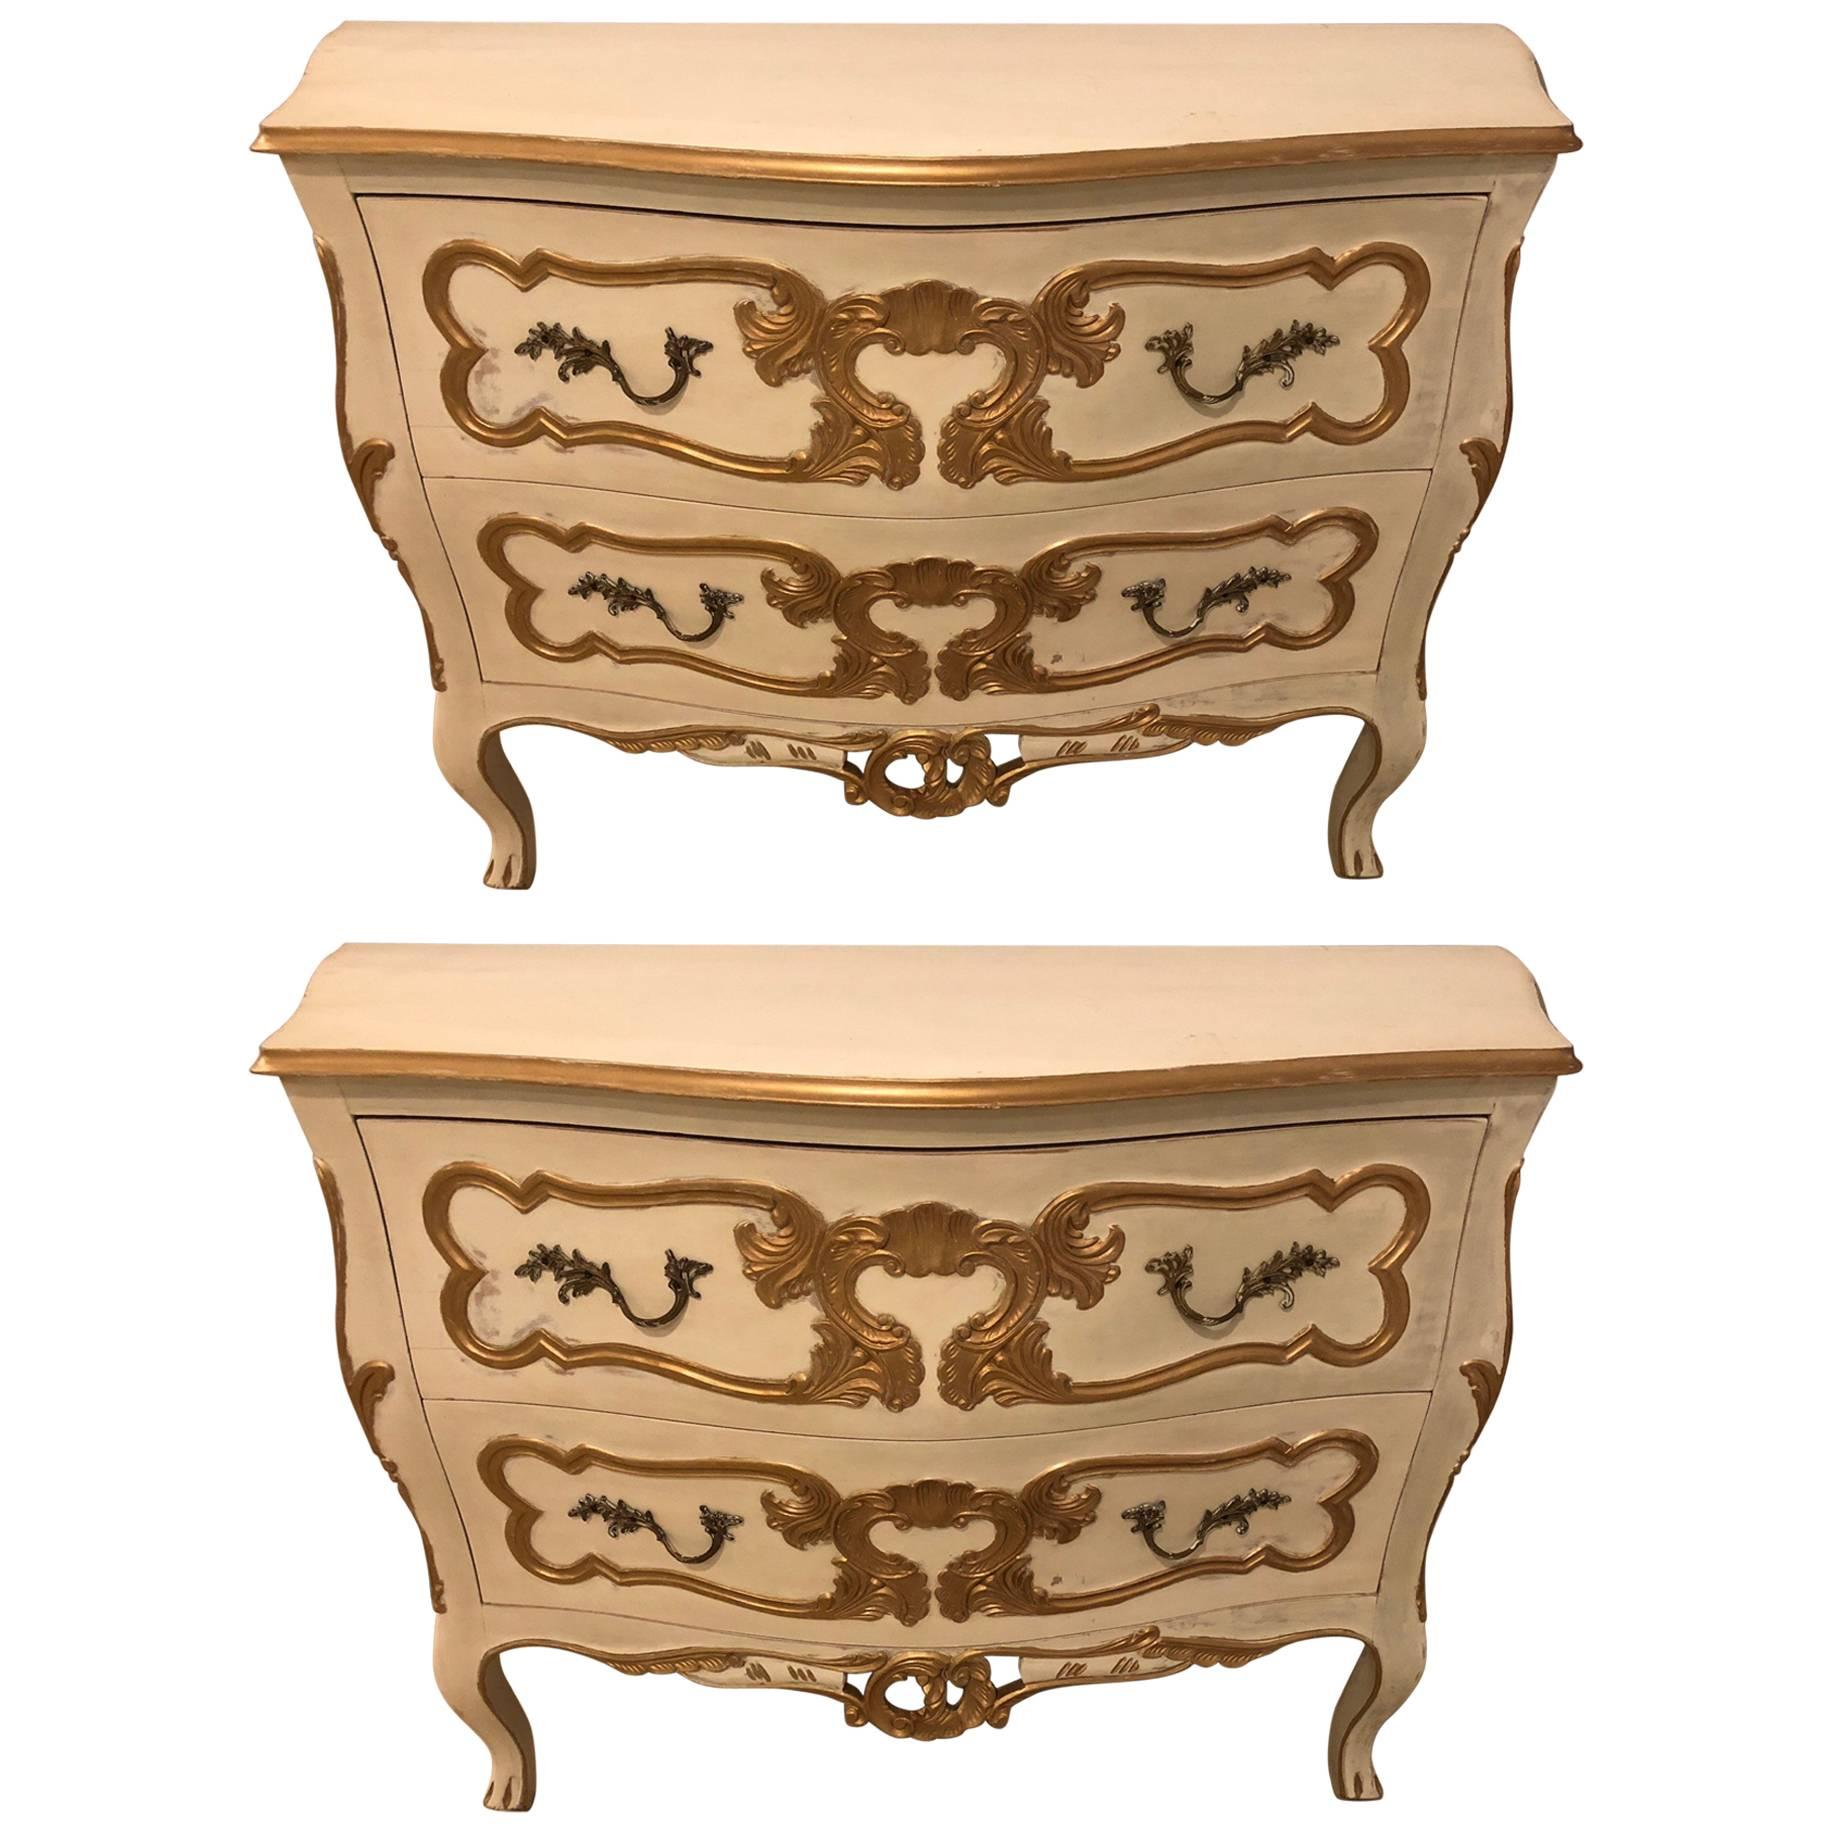 Pair of Italian Bombe Commodes or Nightstands Parcel Paint and Gilt Decorated